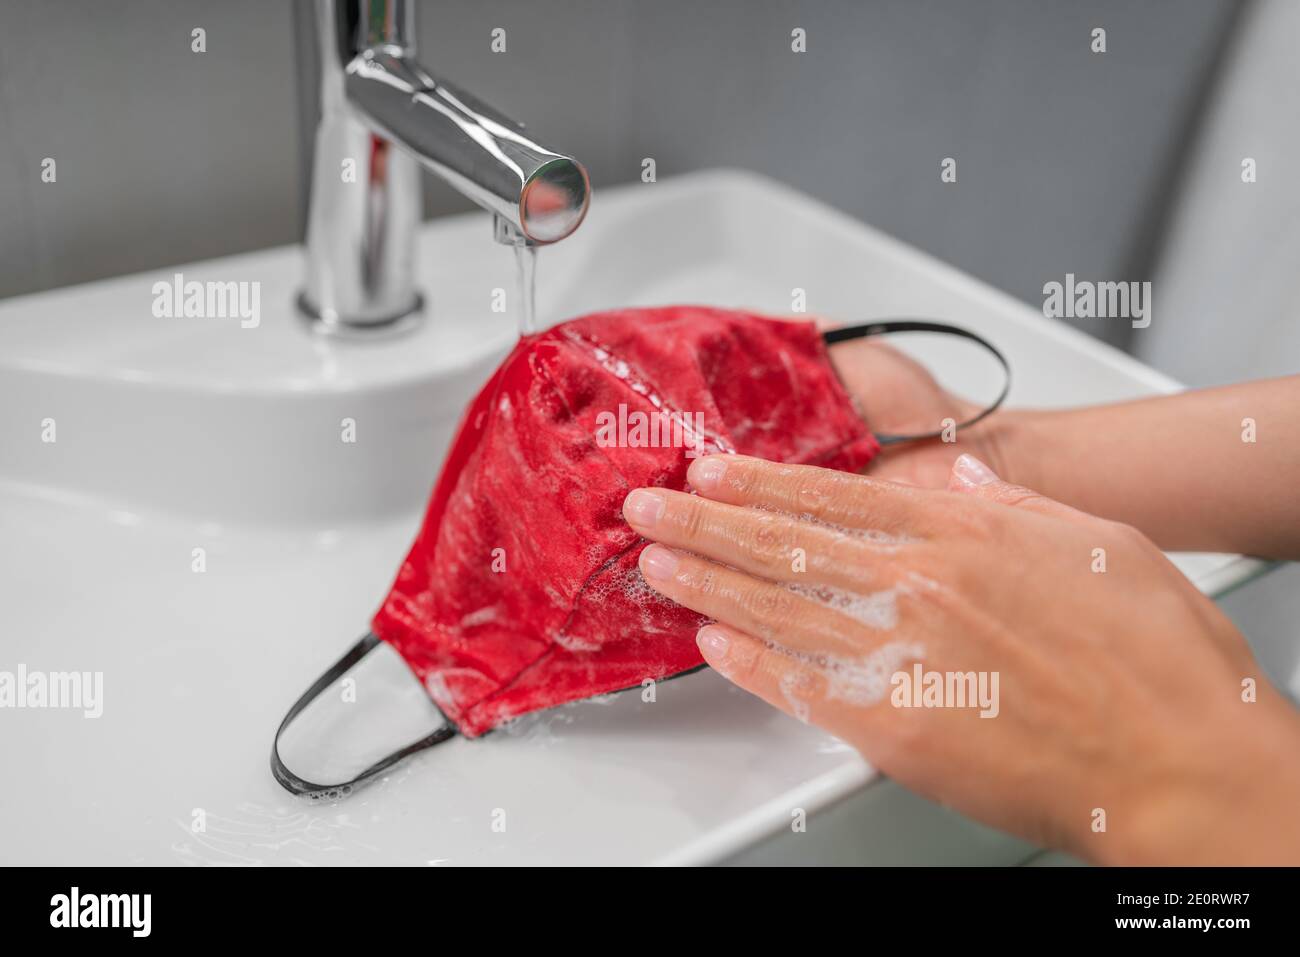 Washing cloth mask by hand after one use. Corona virus preventive face covering cleaning at home in sink Stock Photo